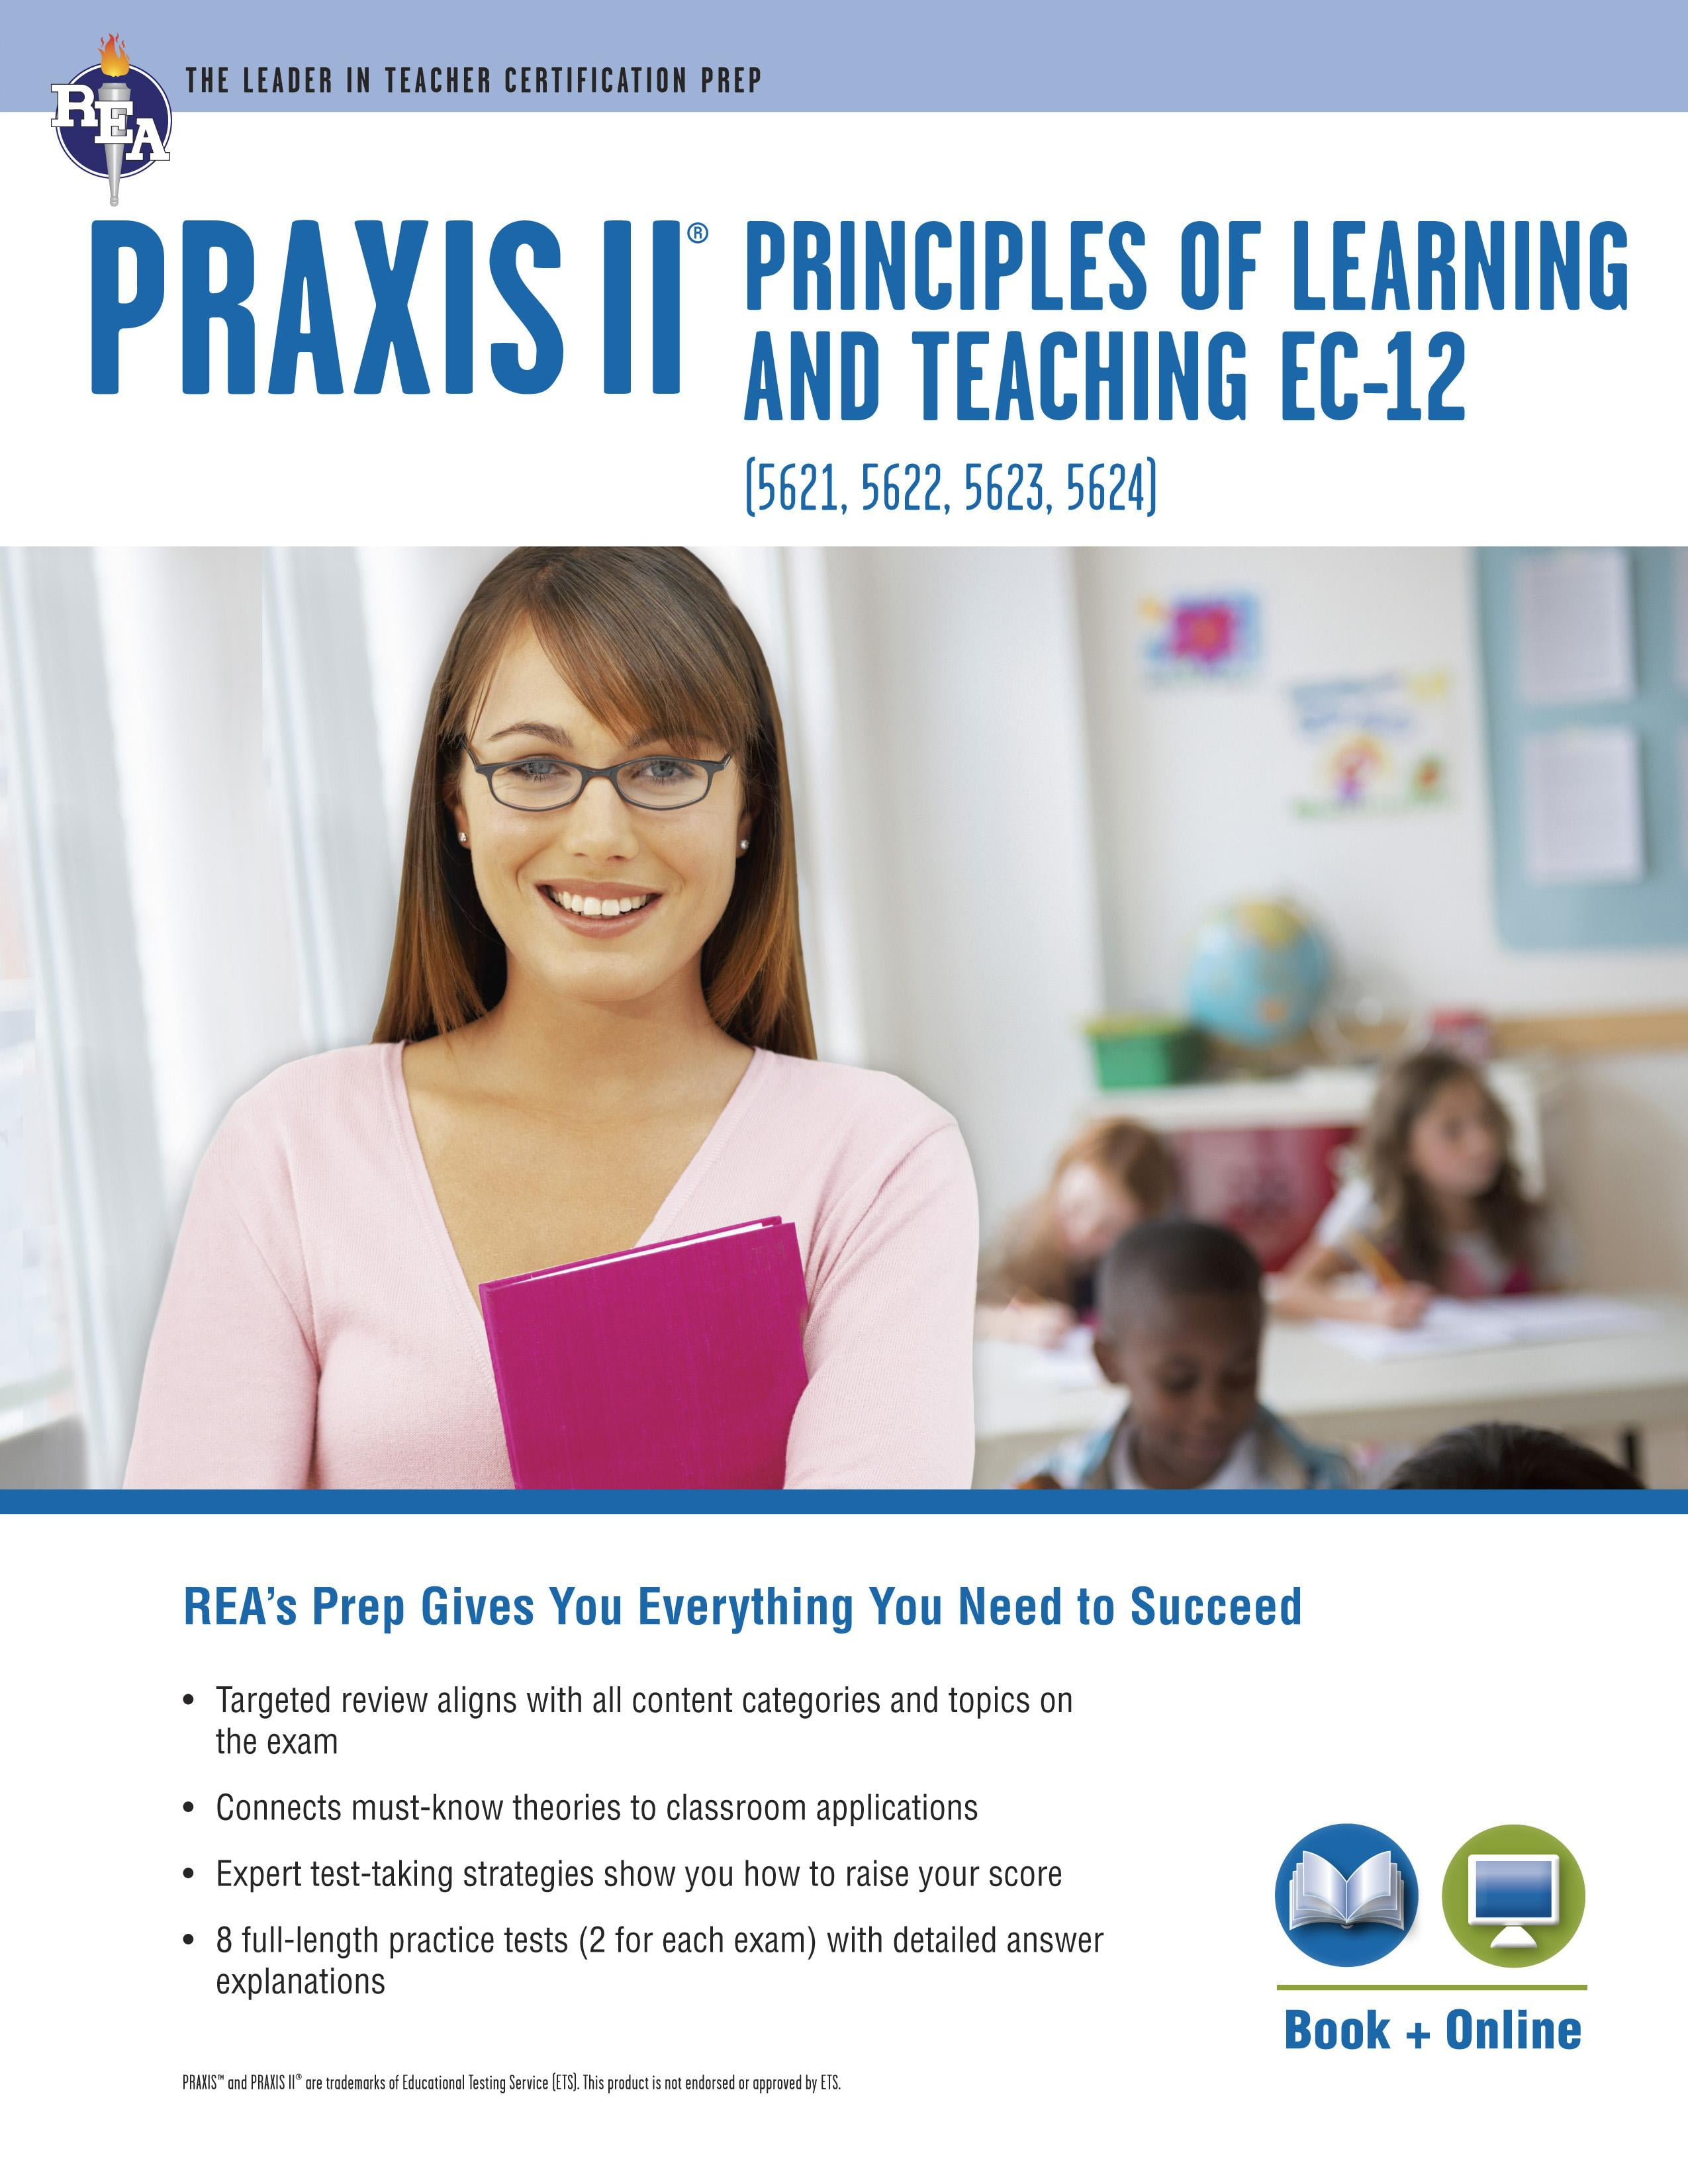 The Praxis® Tests. Test-teach-Test картинка. The Praxis Learning. Test for teachers